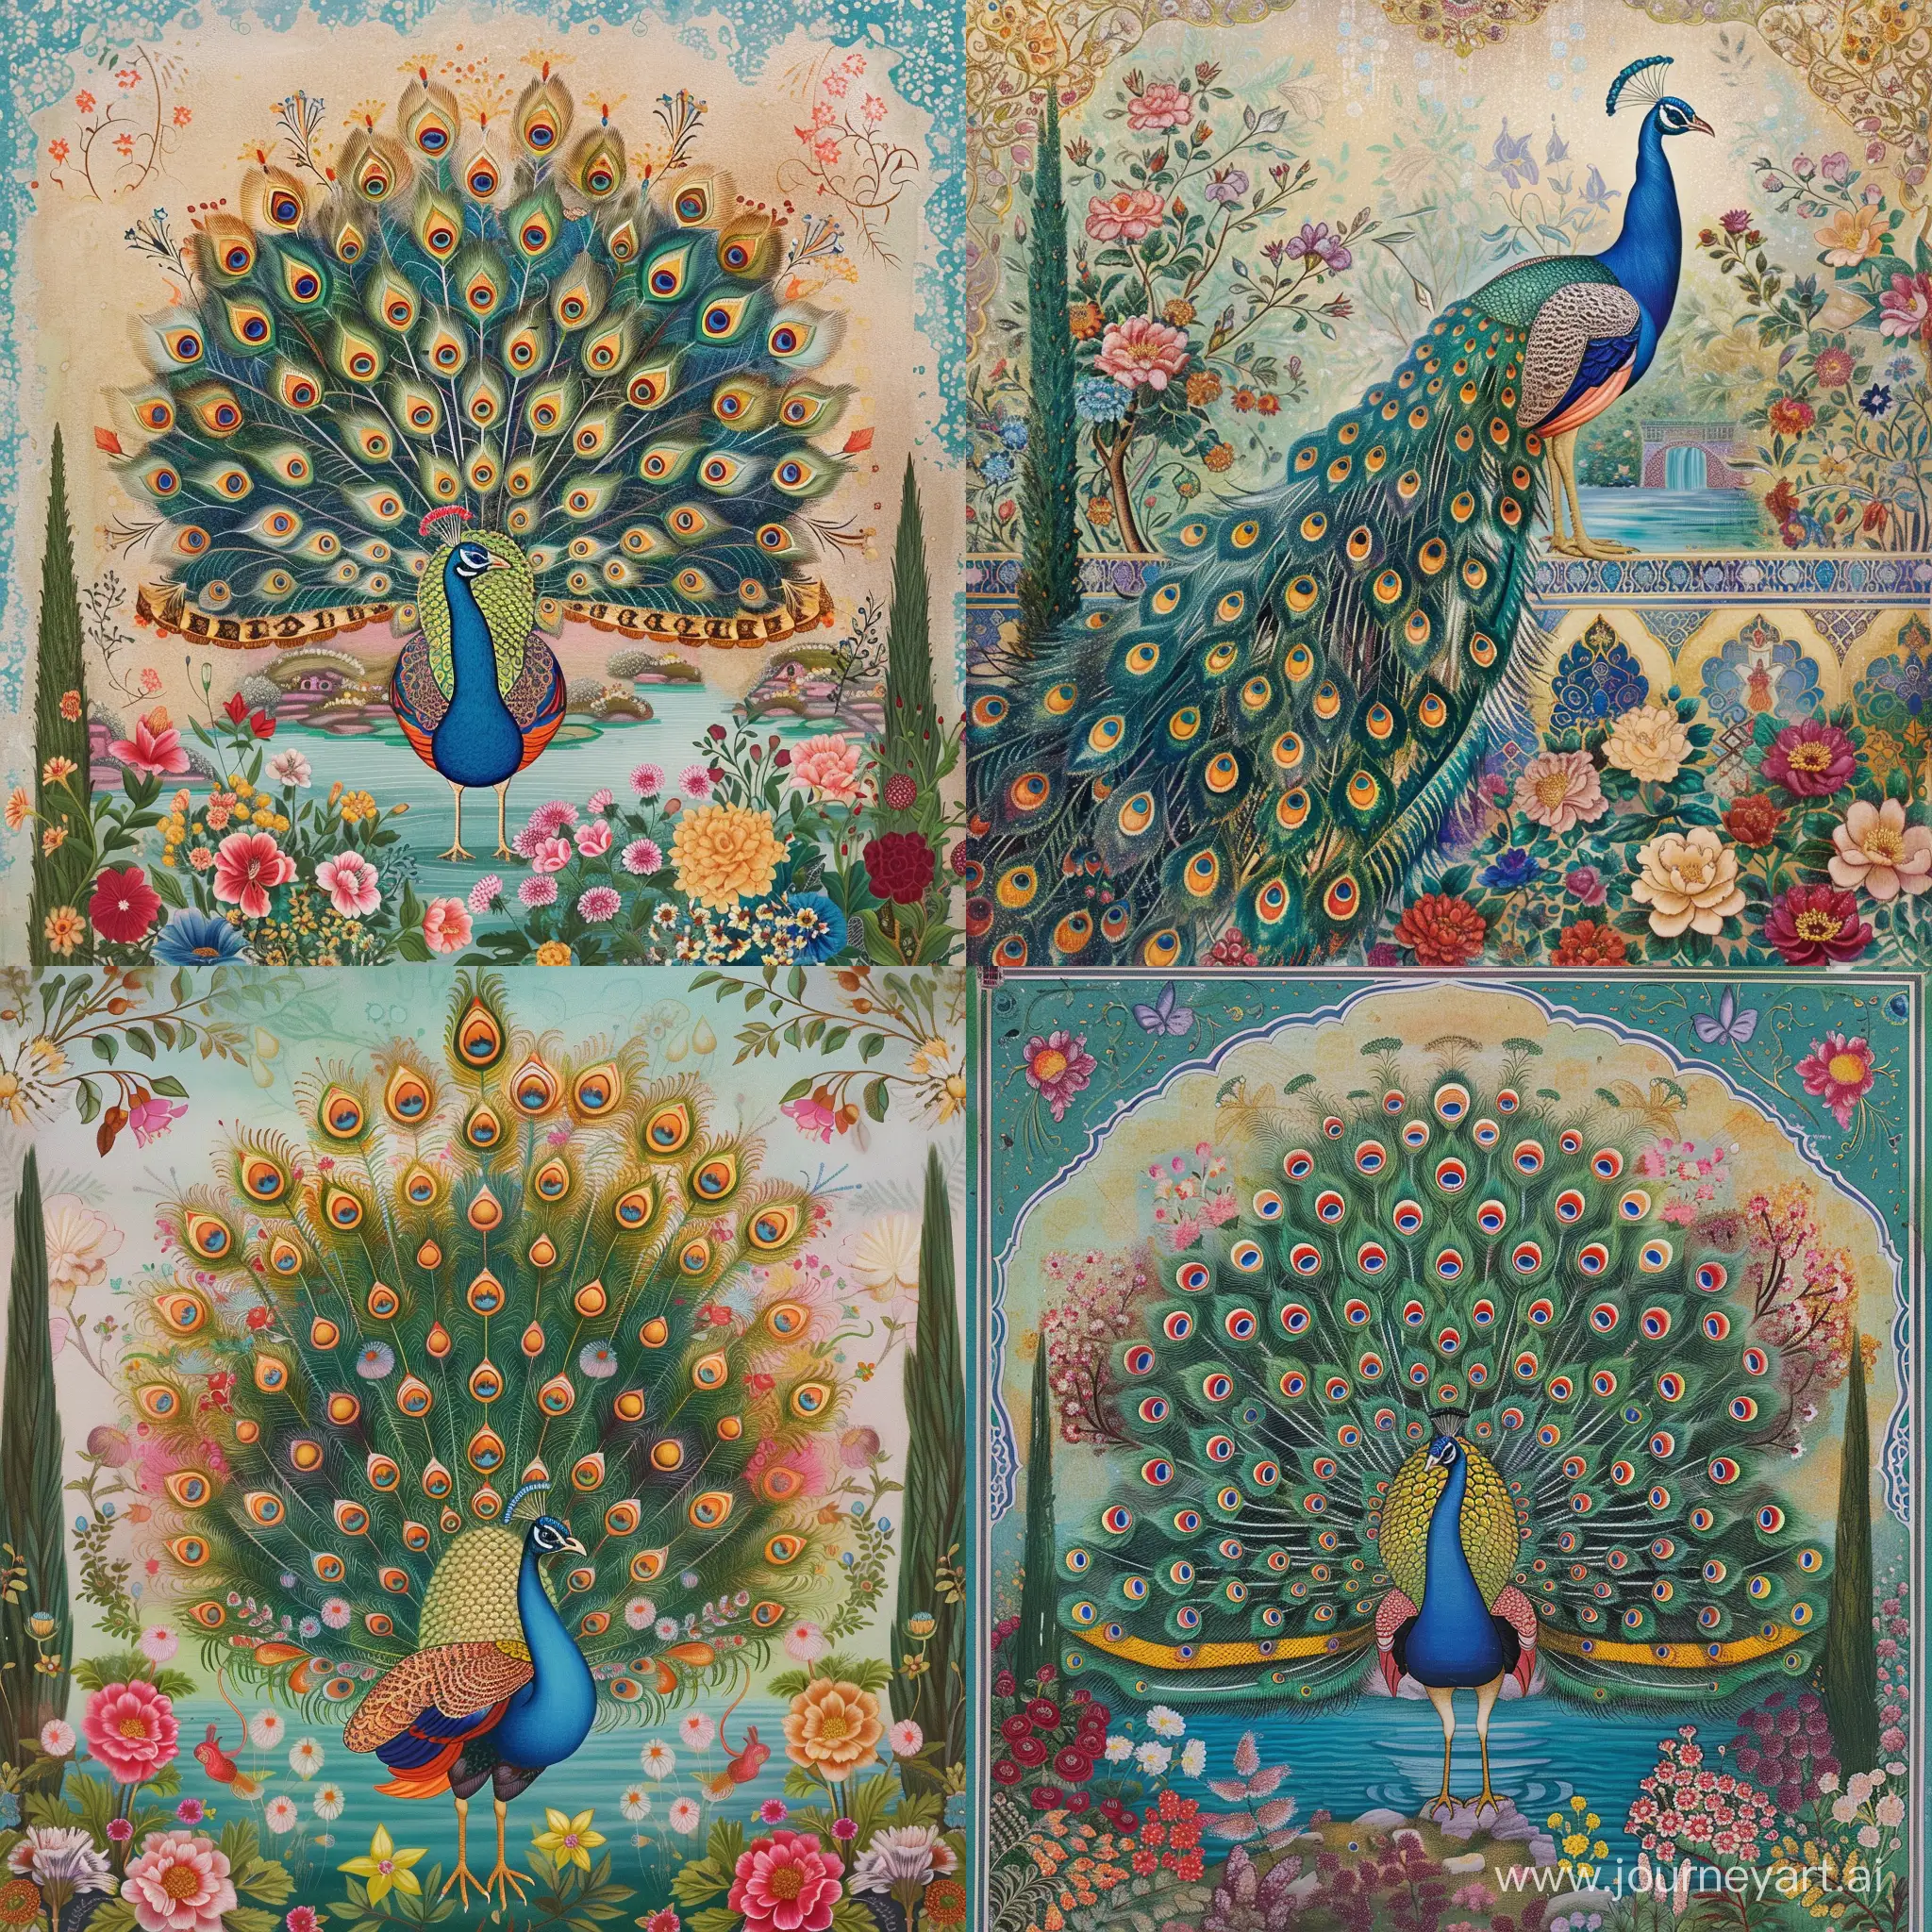 Majestic-Peacock-in-Tranquil-Persian-Garden-Painting